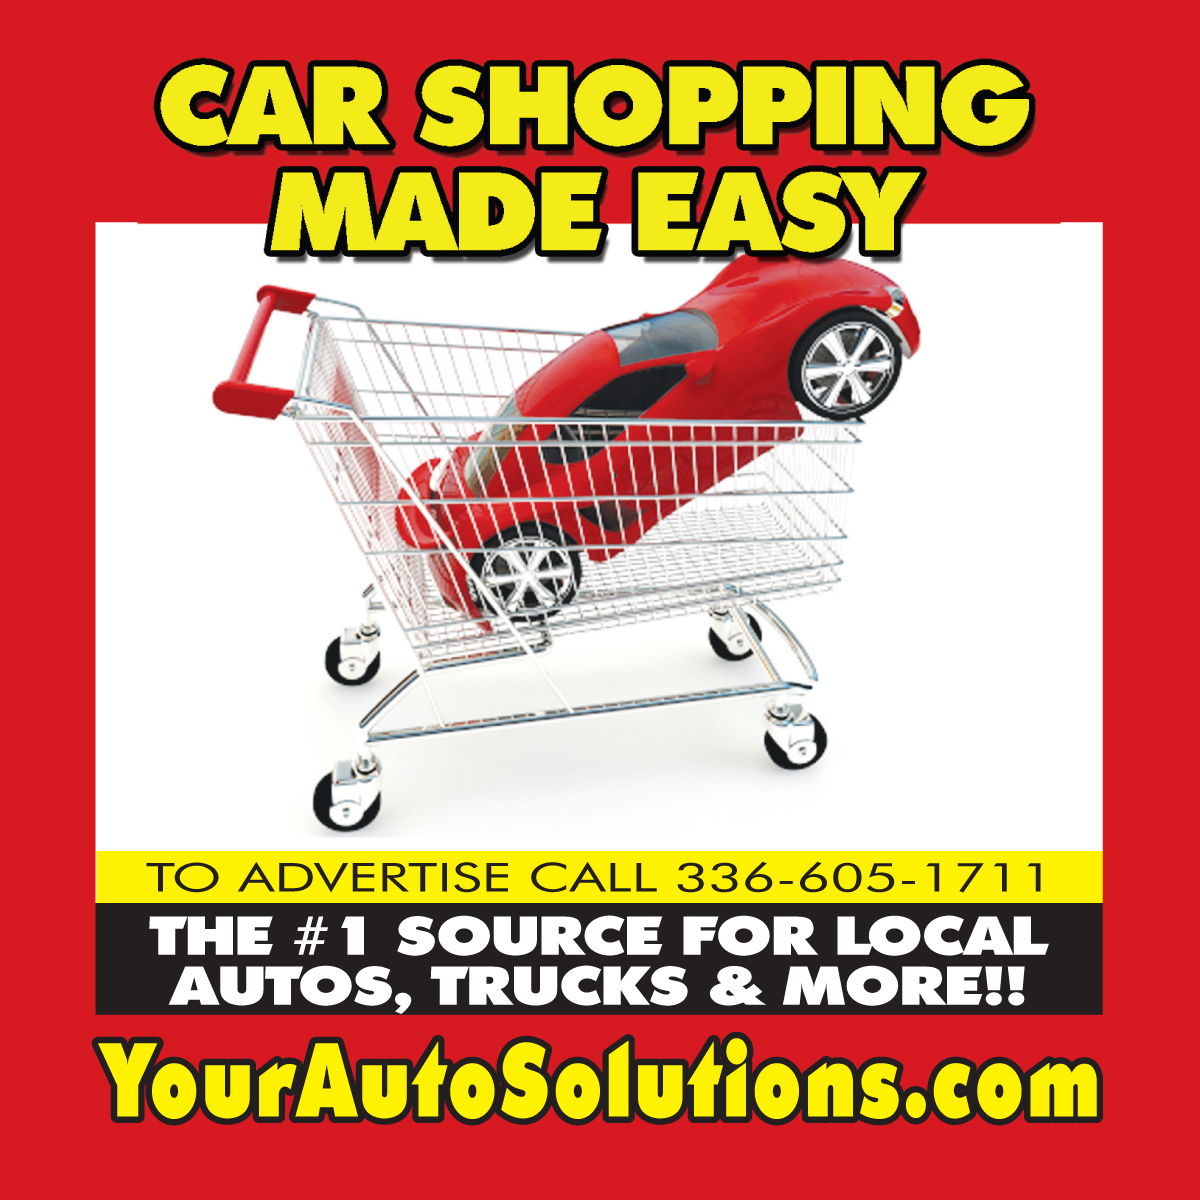 We make car shopping easy. Pick up a copy of Your Auto Solutions today!  #yourautosolutions #autobuyer #autoshopper #greensboro #winstonsalem #highpoint #thomasville #kernersville #asheboro #carbuyers